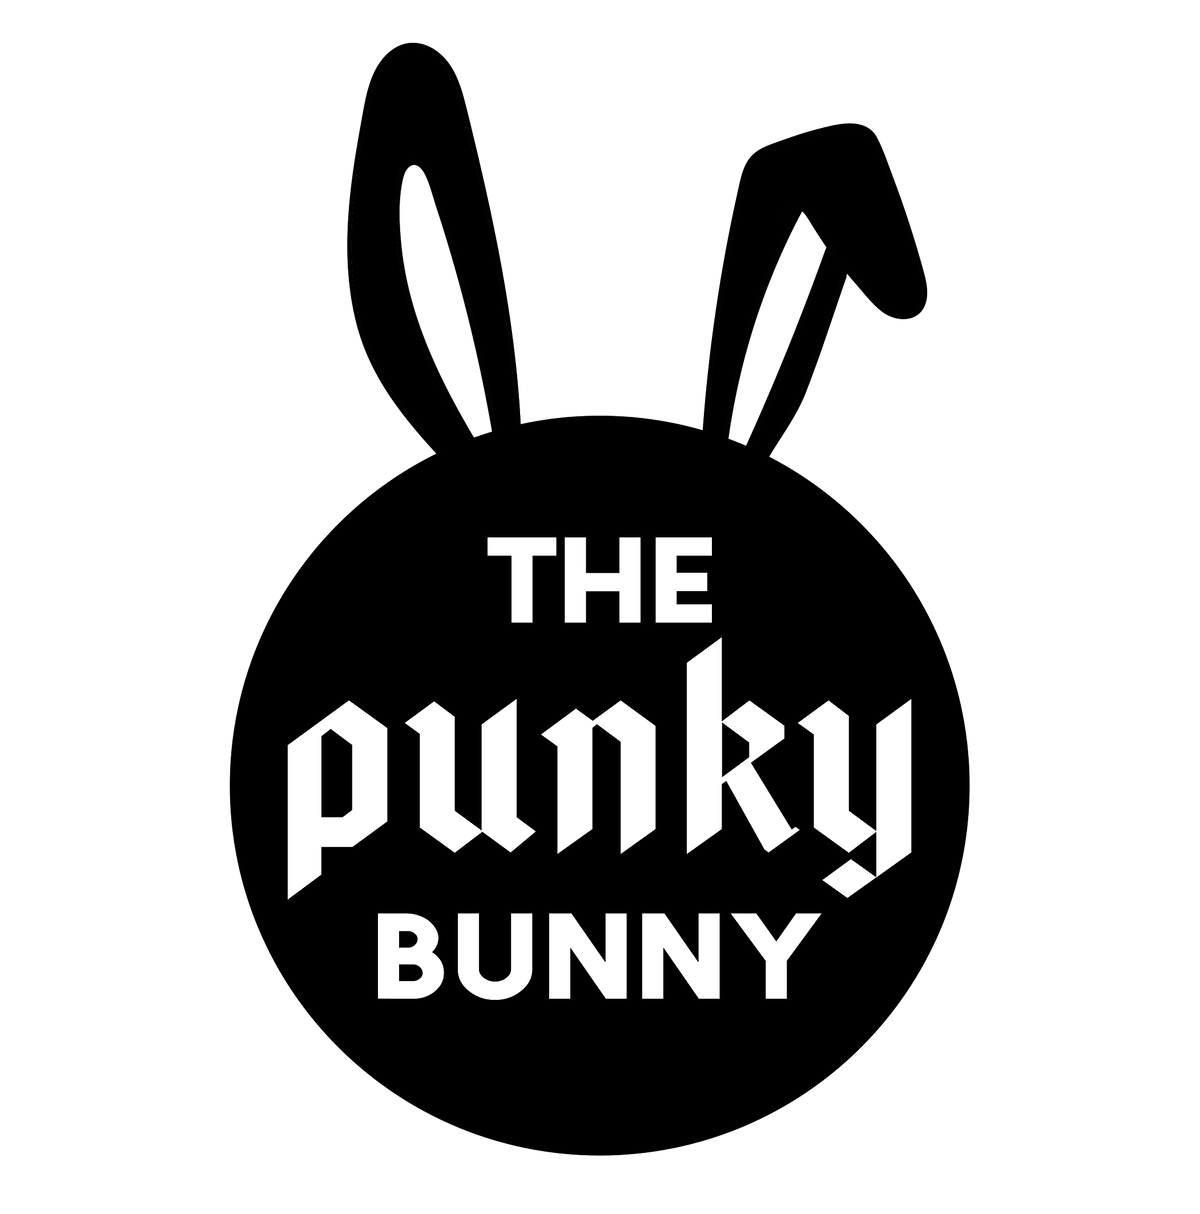 JOURNAL SERIES: THE PUNKY BUNNY